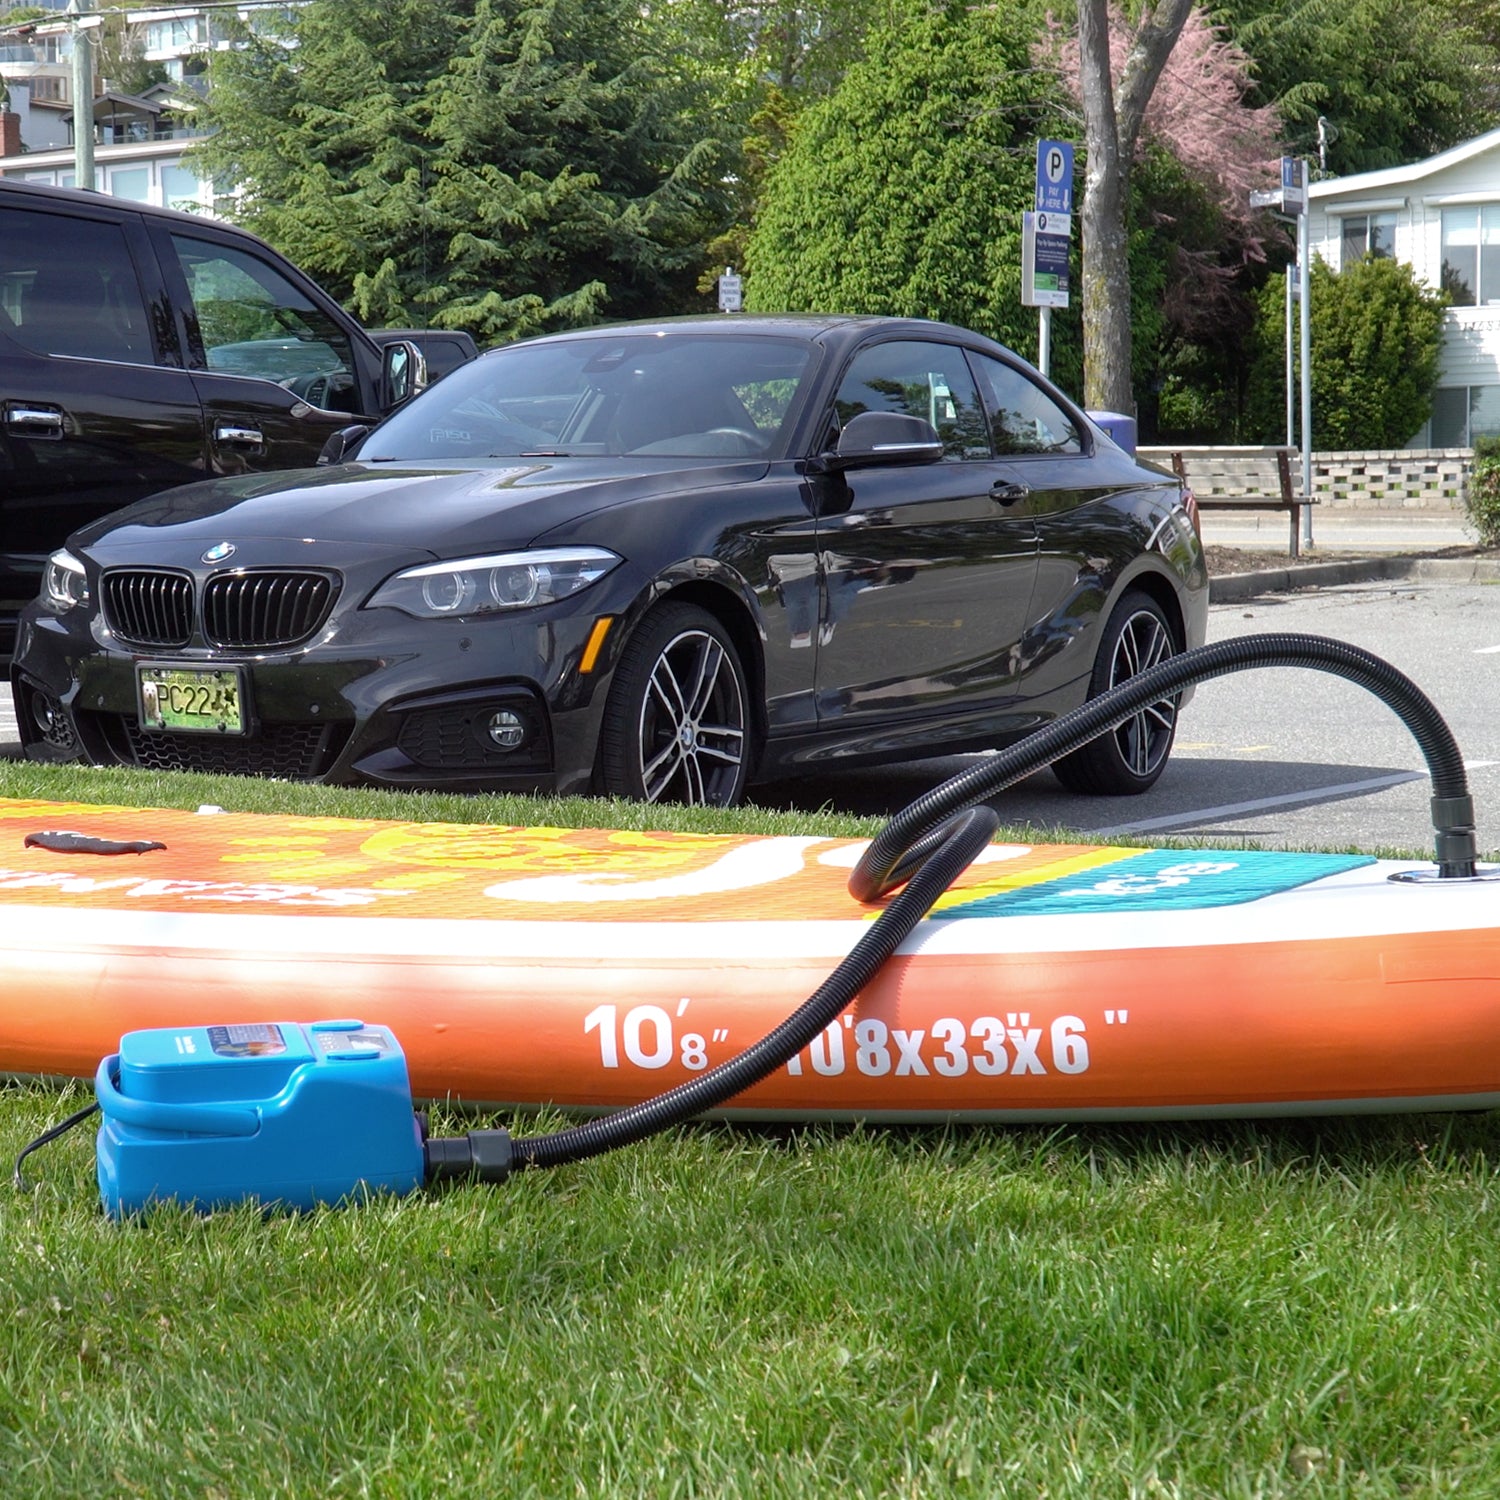 Seamax Best Portable SUP16DB Electric Air Pump Max 16PSI, Double Stage built for Fast Speed and High Pressure